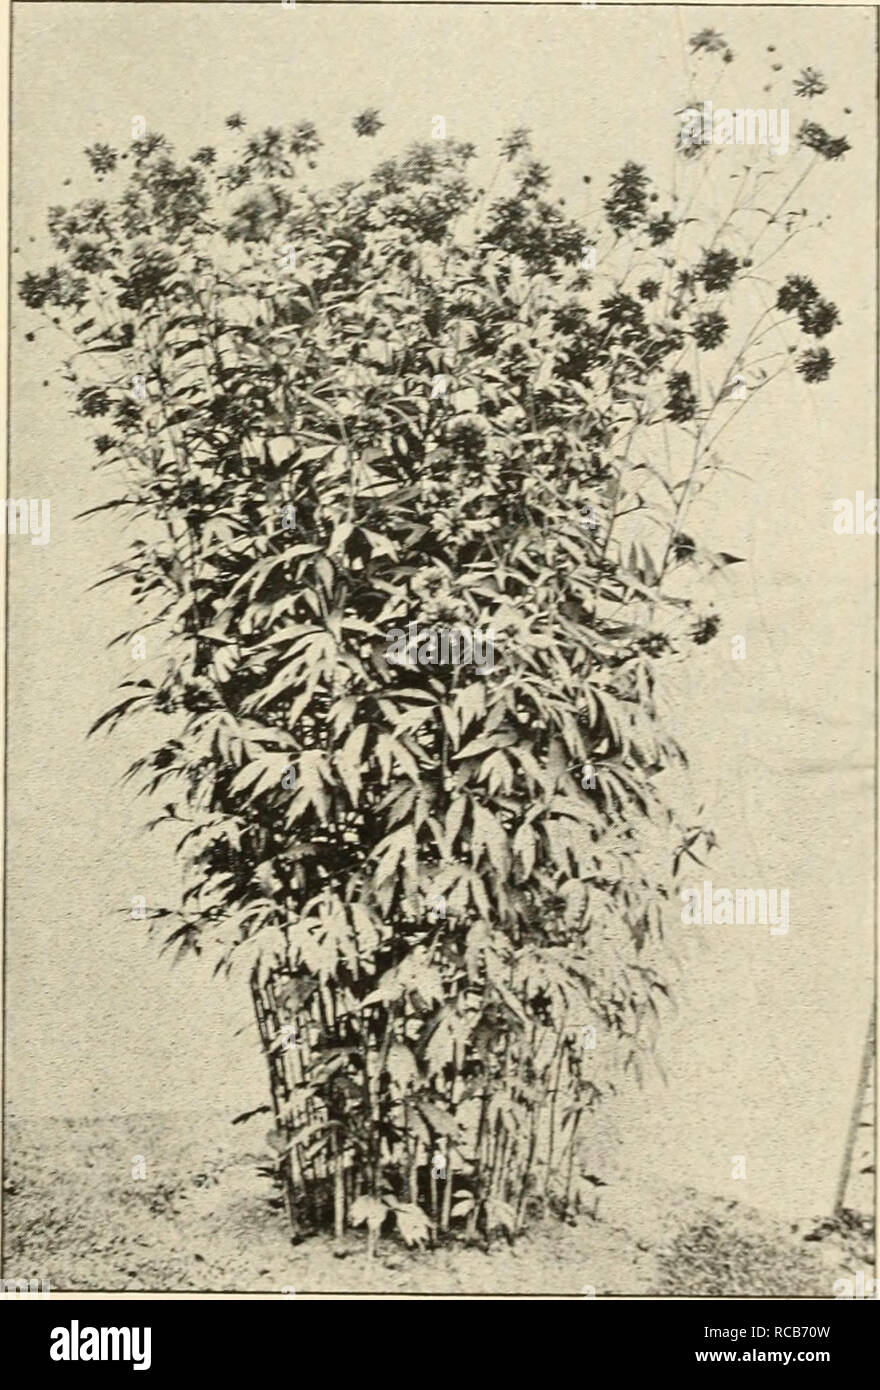 . Ellwanger &amp; Barry : Mount Hope nurseries. GEXERAL CATALOGUE. 115 PYRETHRUM. A most valuable class of hardy plants. Flowers of good size and form, double like an aster: for bouquets or cut flowers. The plants make showy specimens in the garden. May or June. FIXE NAMED VARIETIES. ;o Cents Each. ery useful RANUNCULUS. Buttercup. These are among the best of early spring flowers, being very effective. R. amplexicaulis. Flowers snowy white; 6 to 9 inches. April and May. 25c. R. aconitifolius luteo pleno. Double orange yellow Crowfoot; 2 feet. May and June. 25c. R. bulbosus. Yellow; double; han Stock Photo